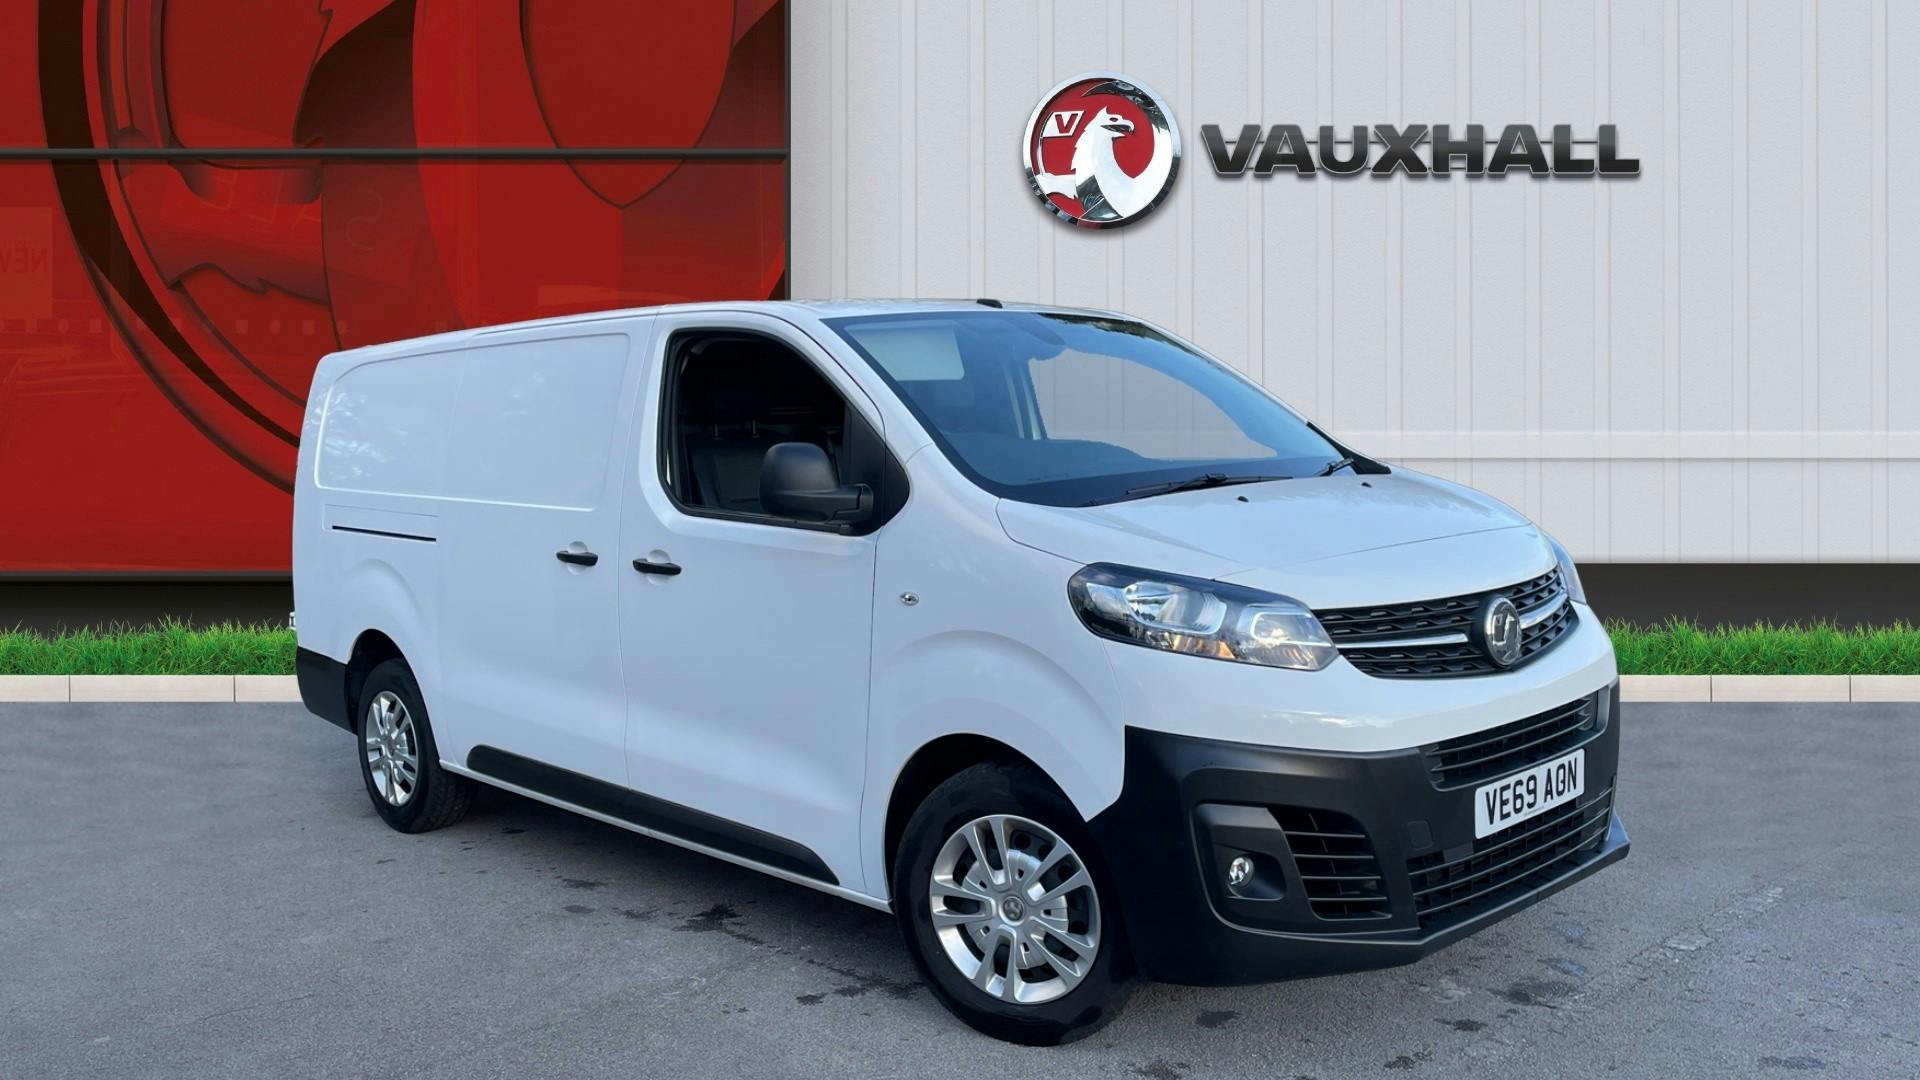 Used Vauxhall Vans For Sale | Nearly 